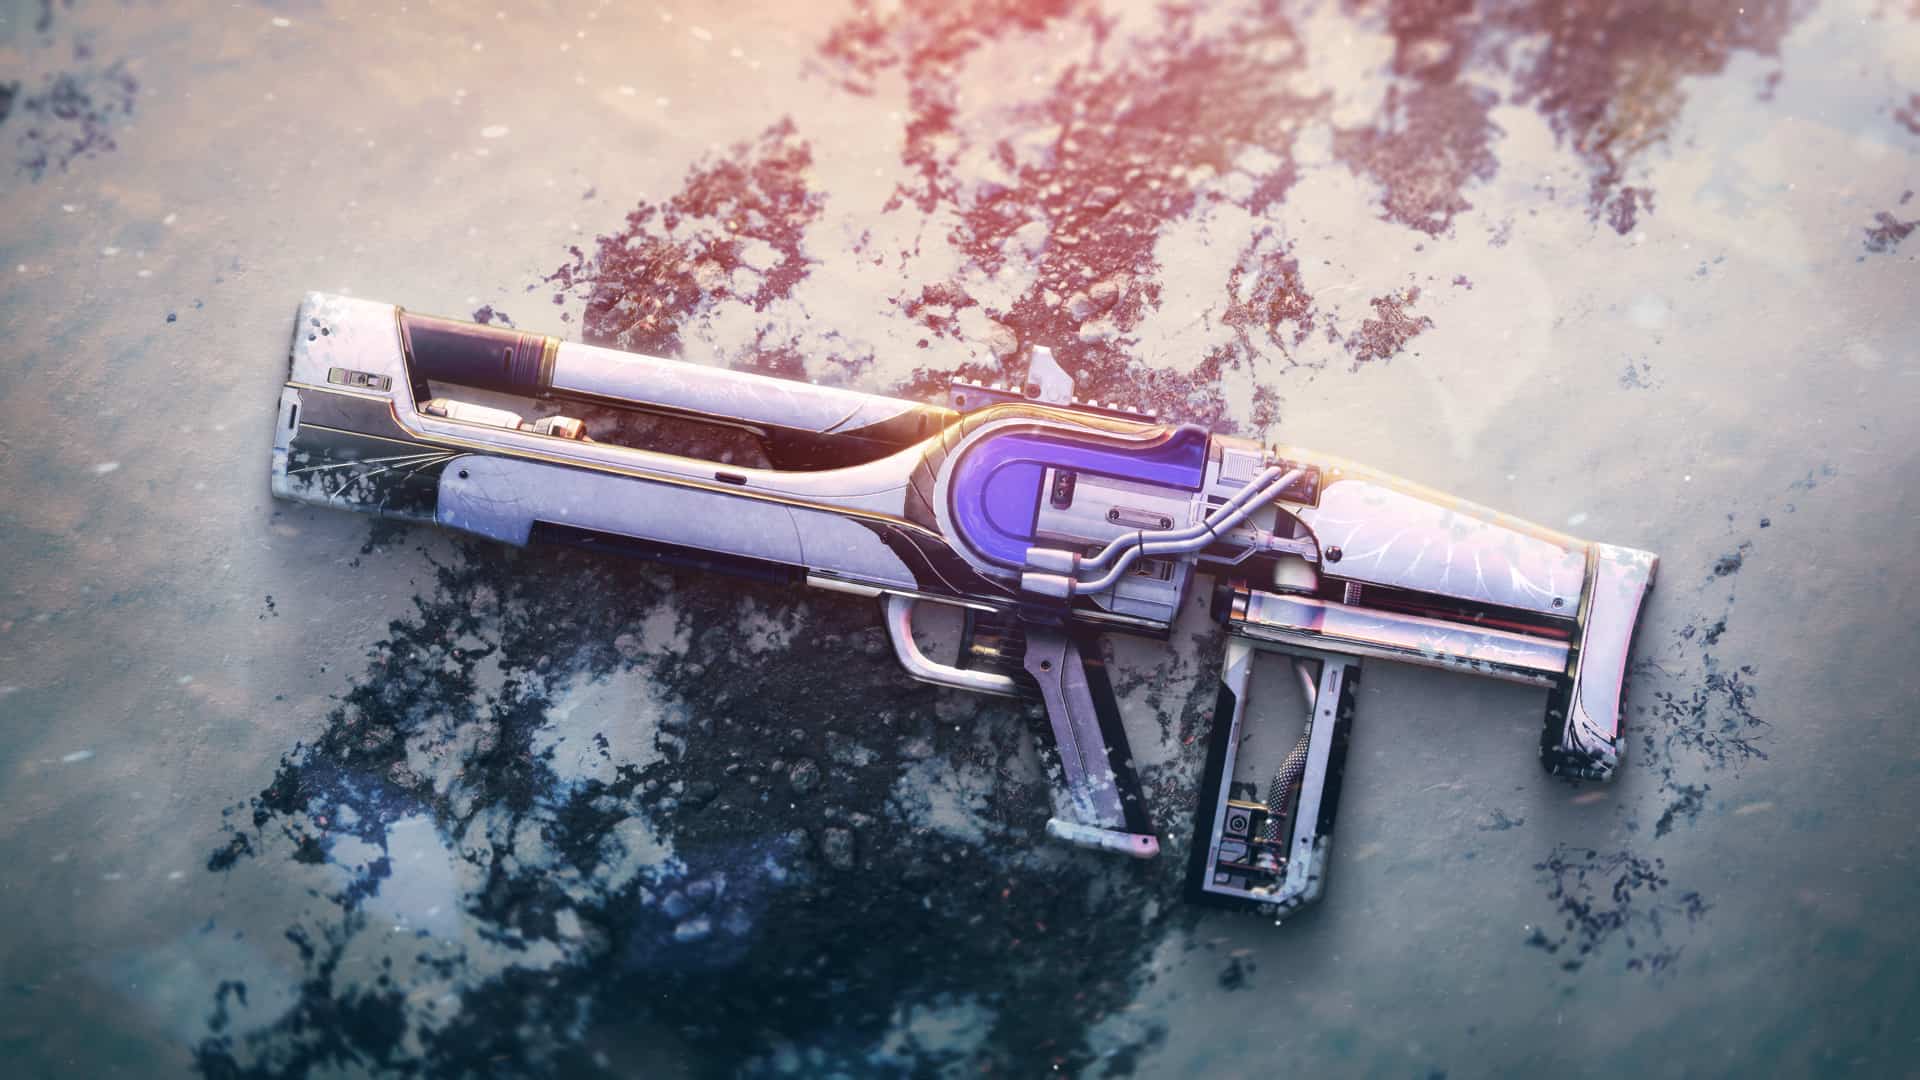 The Dawning 2022 Pulse Rifle featured Destiny 2